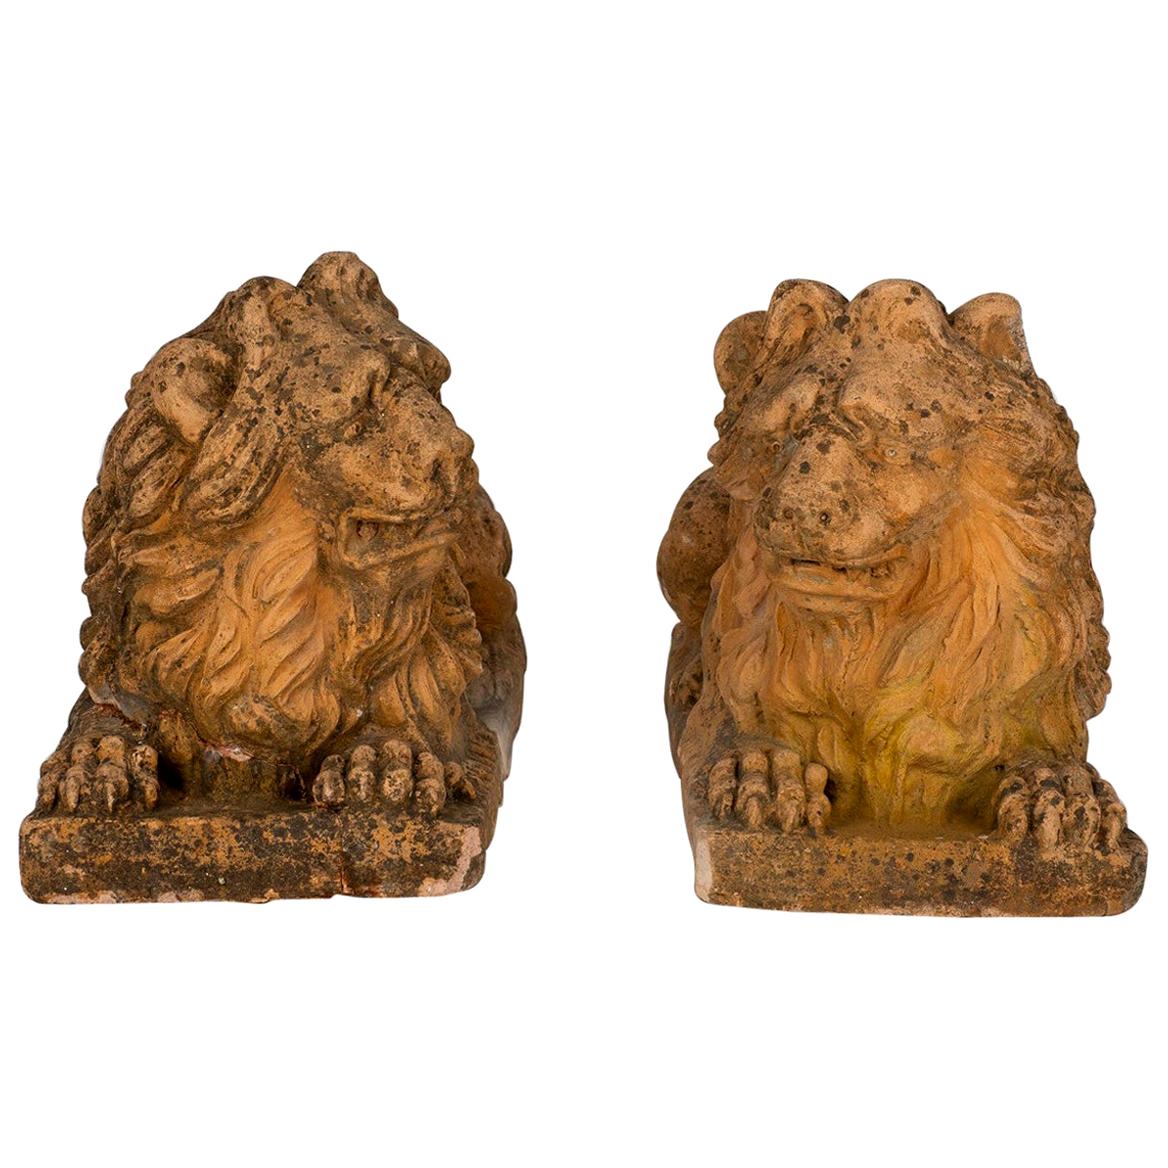 A large opposing pair of Italian mid-19th century terracotta lions. Each lion is raised on a rectangular base. Beautiful expressive faces and wonderfully carved manes with great patina.